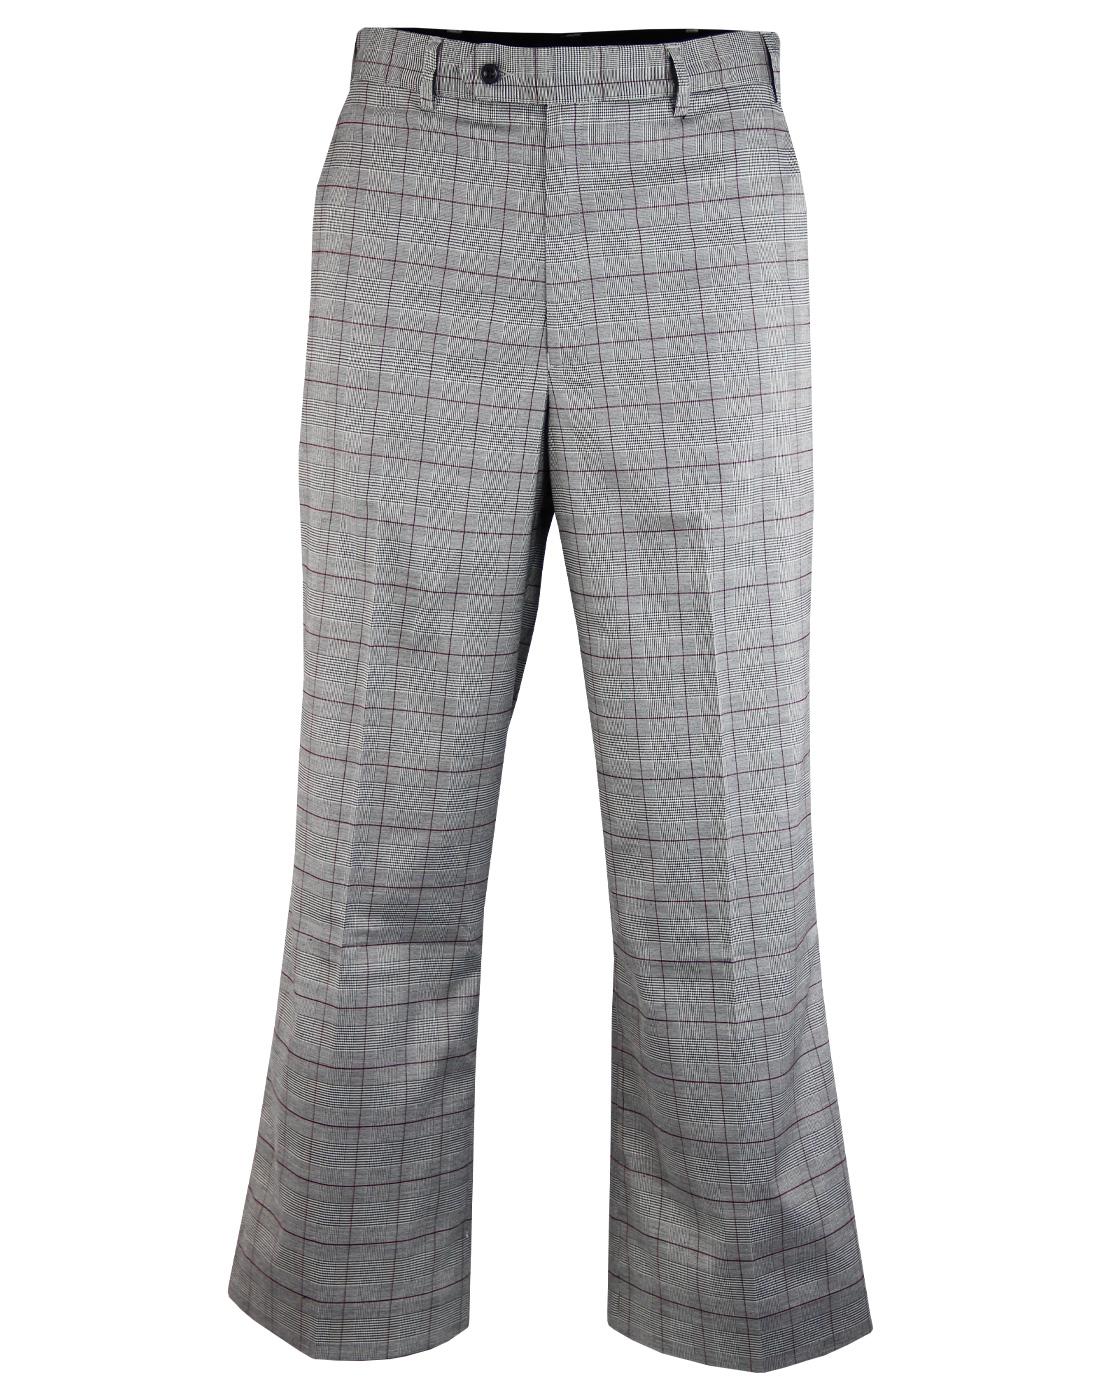 popsikecom  Oxford Bags Northern Soul Trousers Rare  A Bargain  auction  details